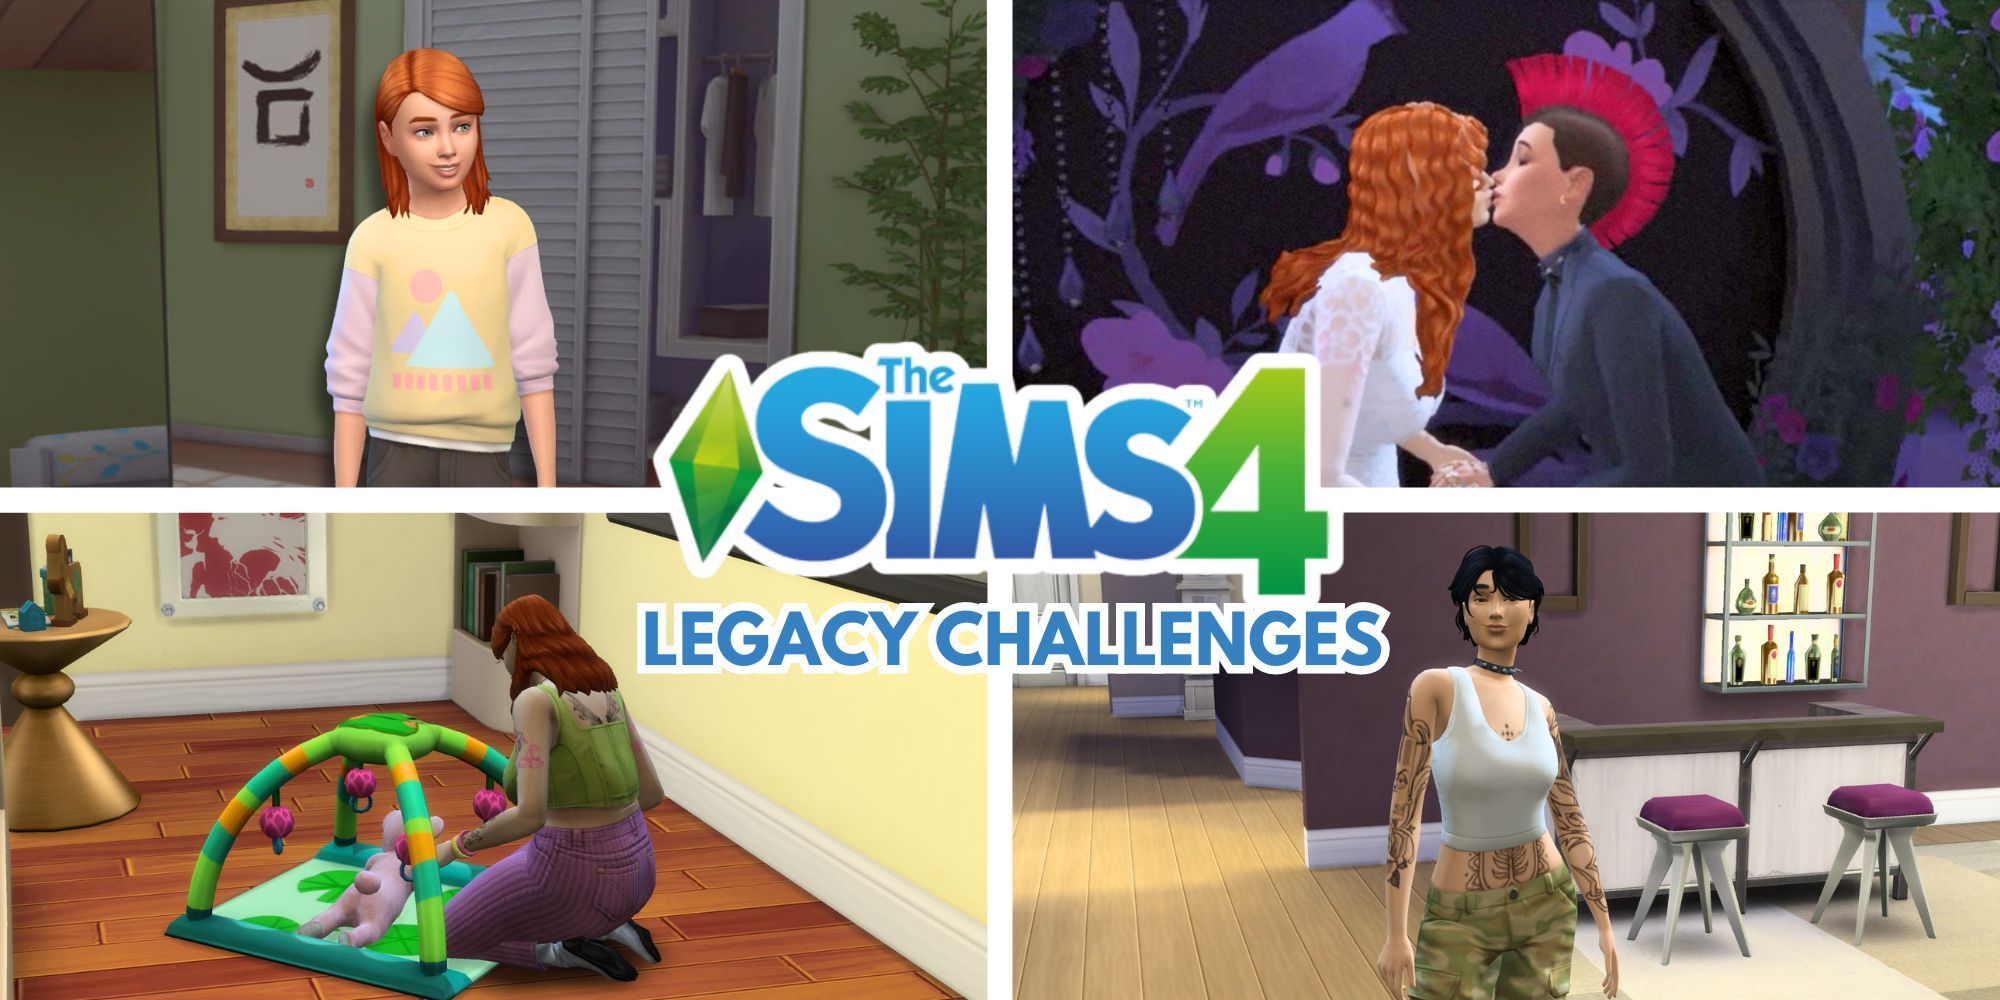 Four pictures are laying in a grid formation. In the upper left, a small child Sim with red hair smiles. In the next photo, the adult version of that Sim is getting married. In the following photo, the red-haired Sim sits as she watches over her baby. In the fourth and final photo, a dark haired androgynous Sim stands in a bar, appearing to be the grown child of the original Sim. Overlaying the photos is the Sims 4 logo, following by the words 